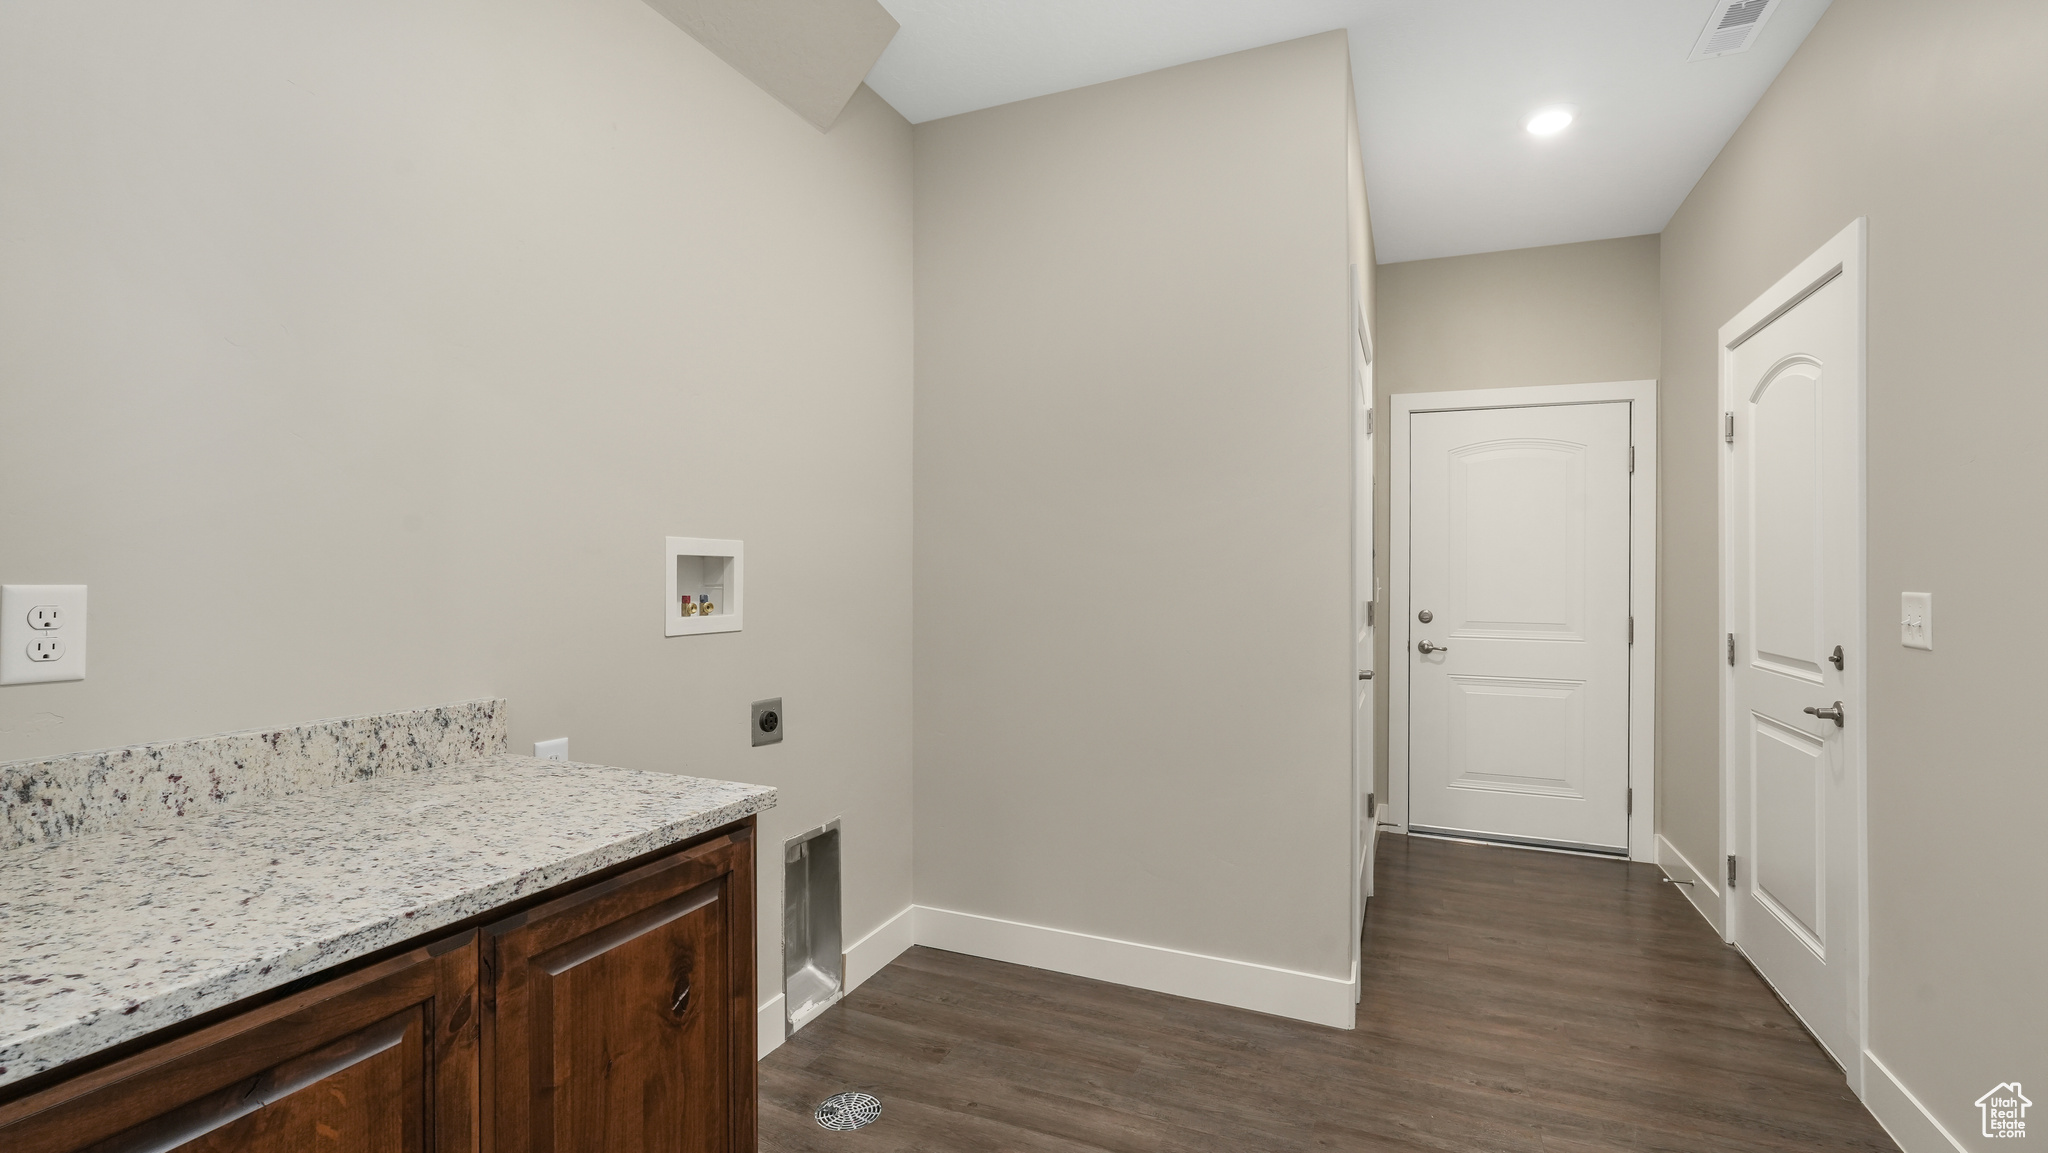 Laundry room with extra storage and access to garage and breezeway.